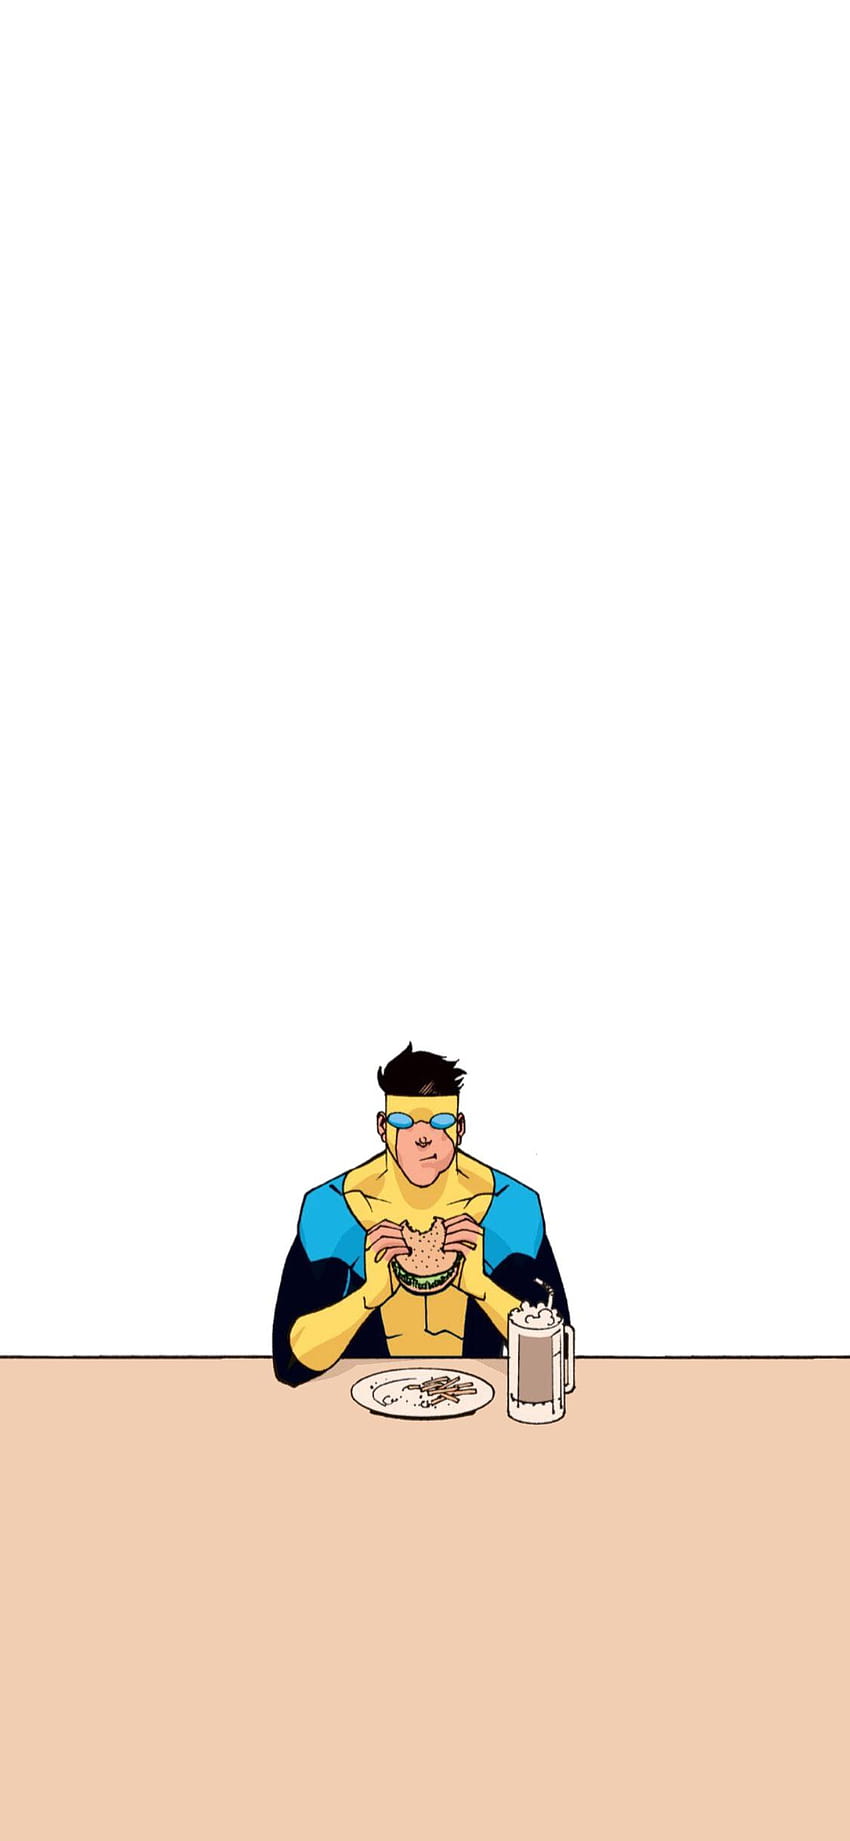 Edited this artwork in Volume One into a phone , hope you like. : Invincible, superhuman strength HD phone wallpaper